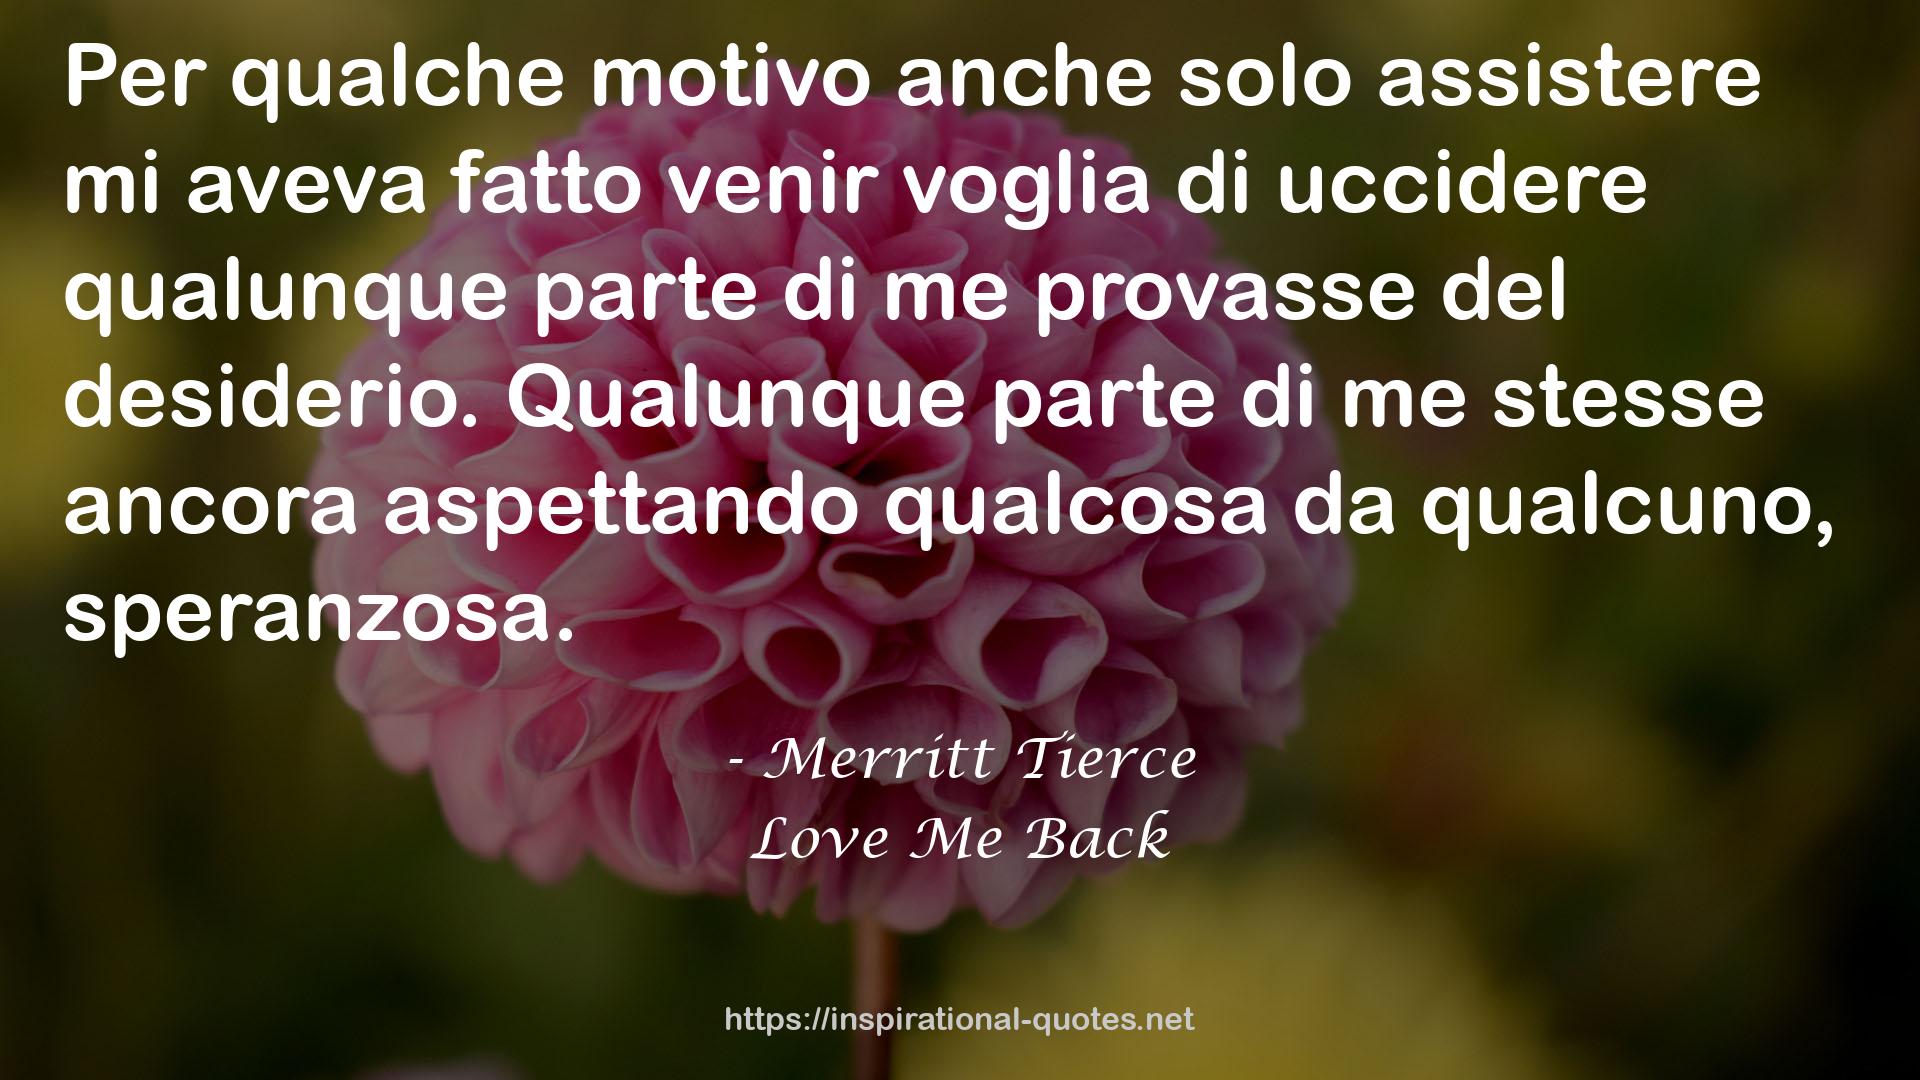 Love Me Back QUOTES